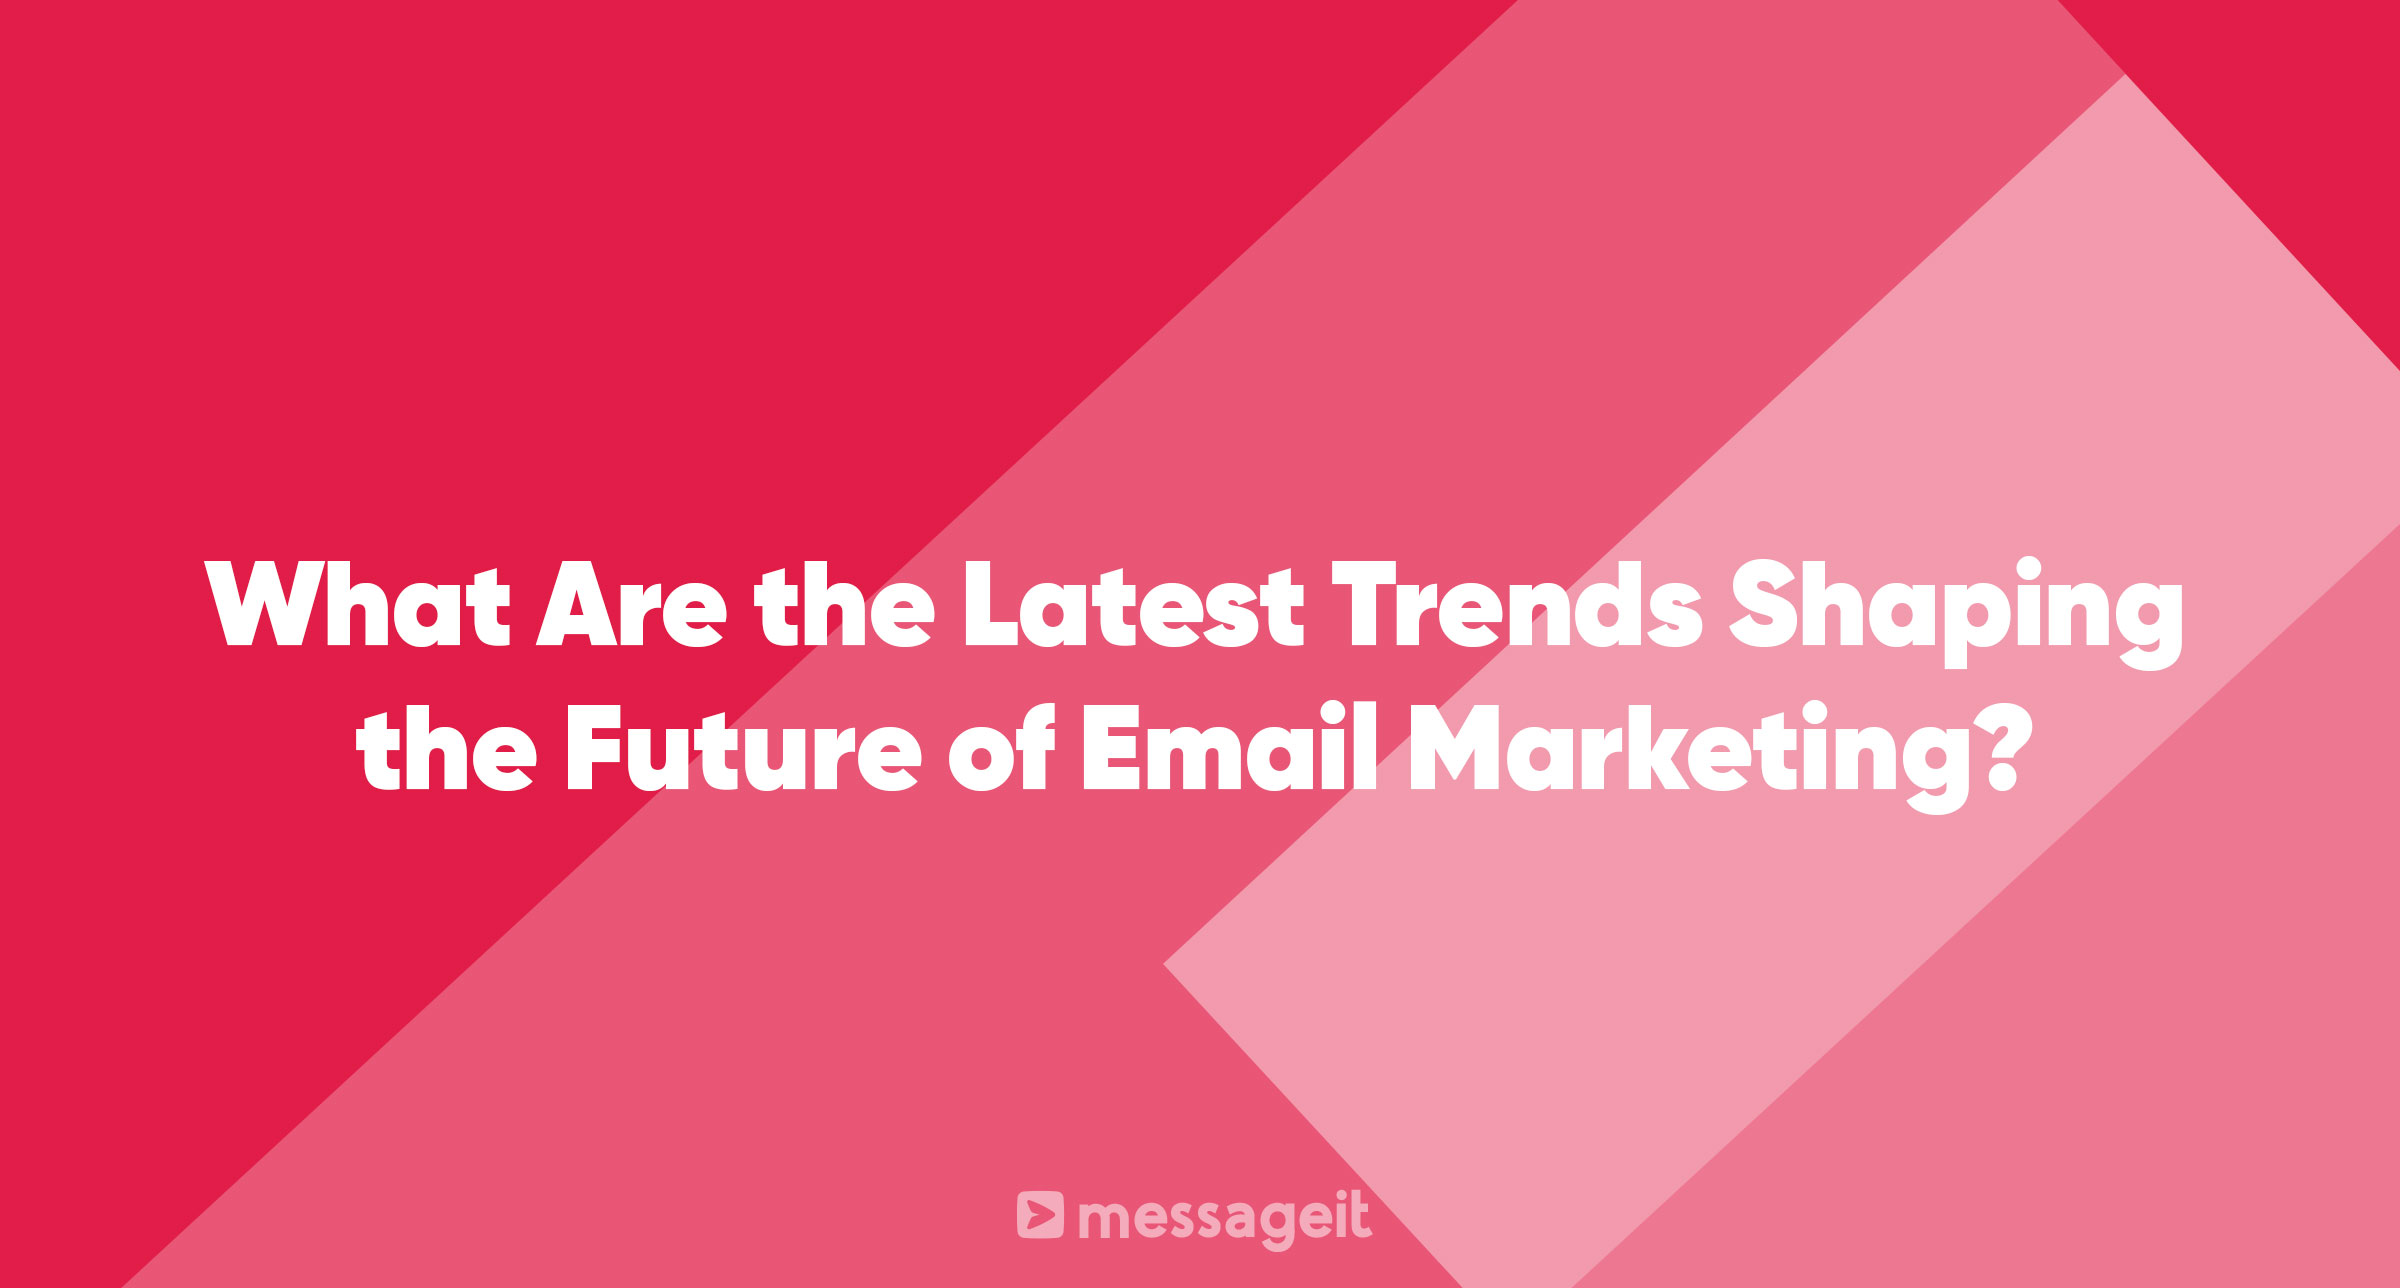 Article | What Are the Latest Trends Shaping the Future of Email Marketing?